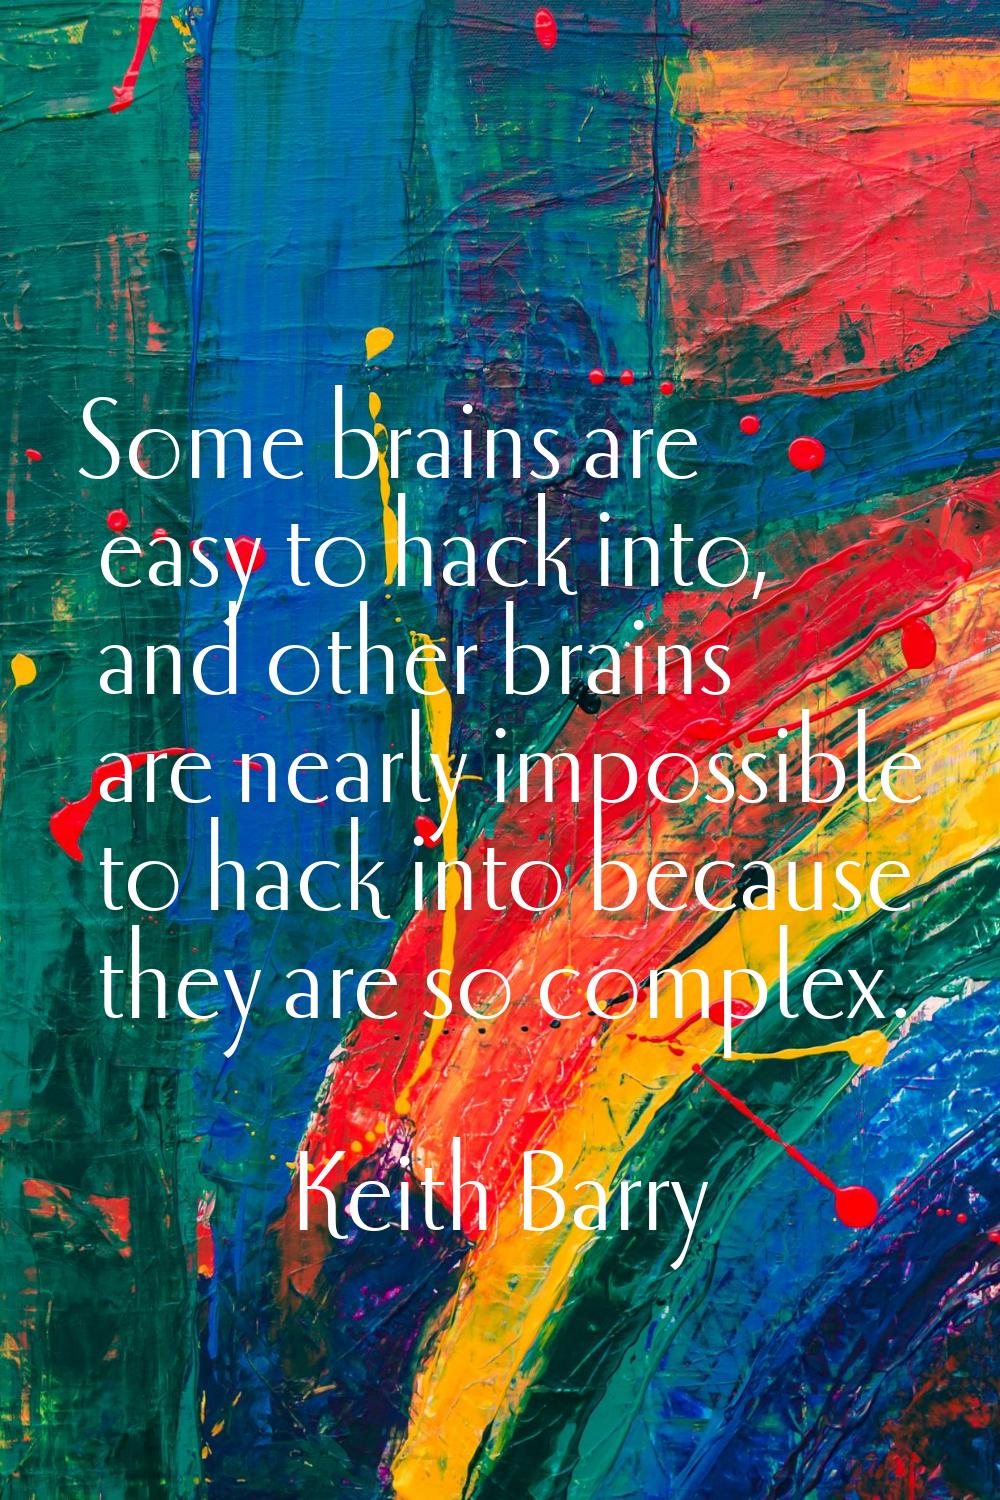 Some brains are easy to hack into, and other brains are nearly impossible to hack into because they